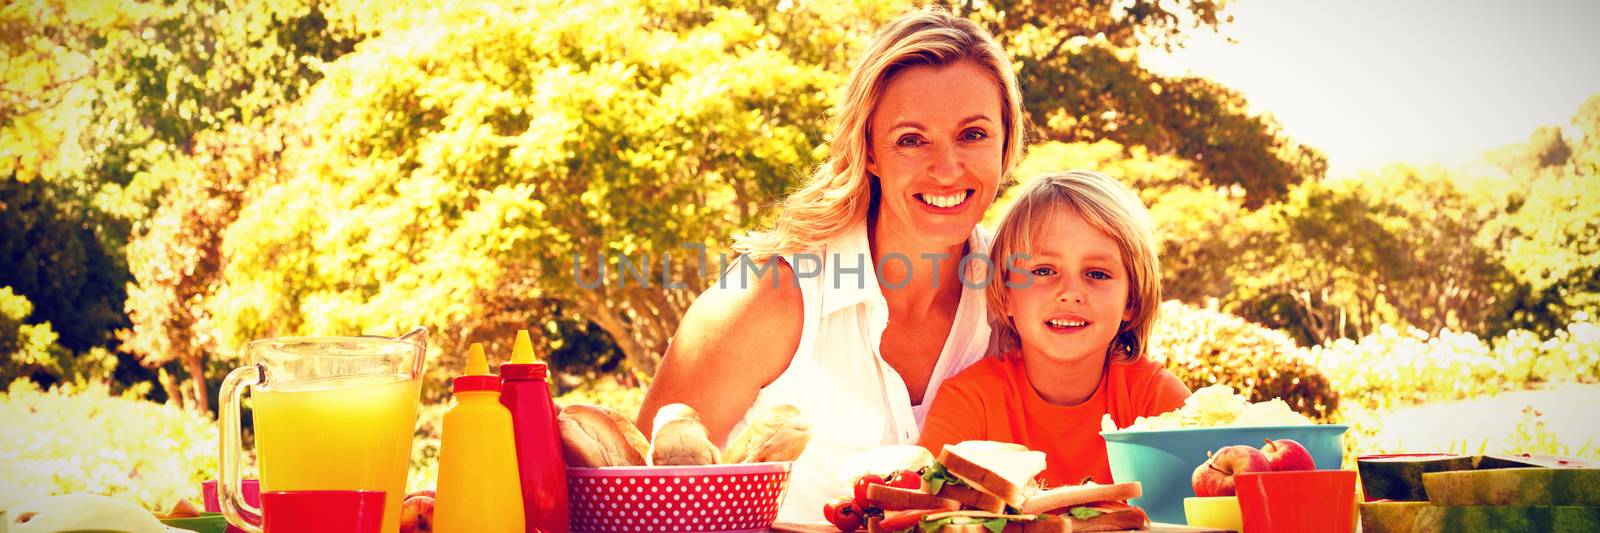 Portrait of happy mother and son having meal in park on a sunny day